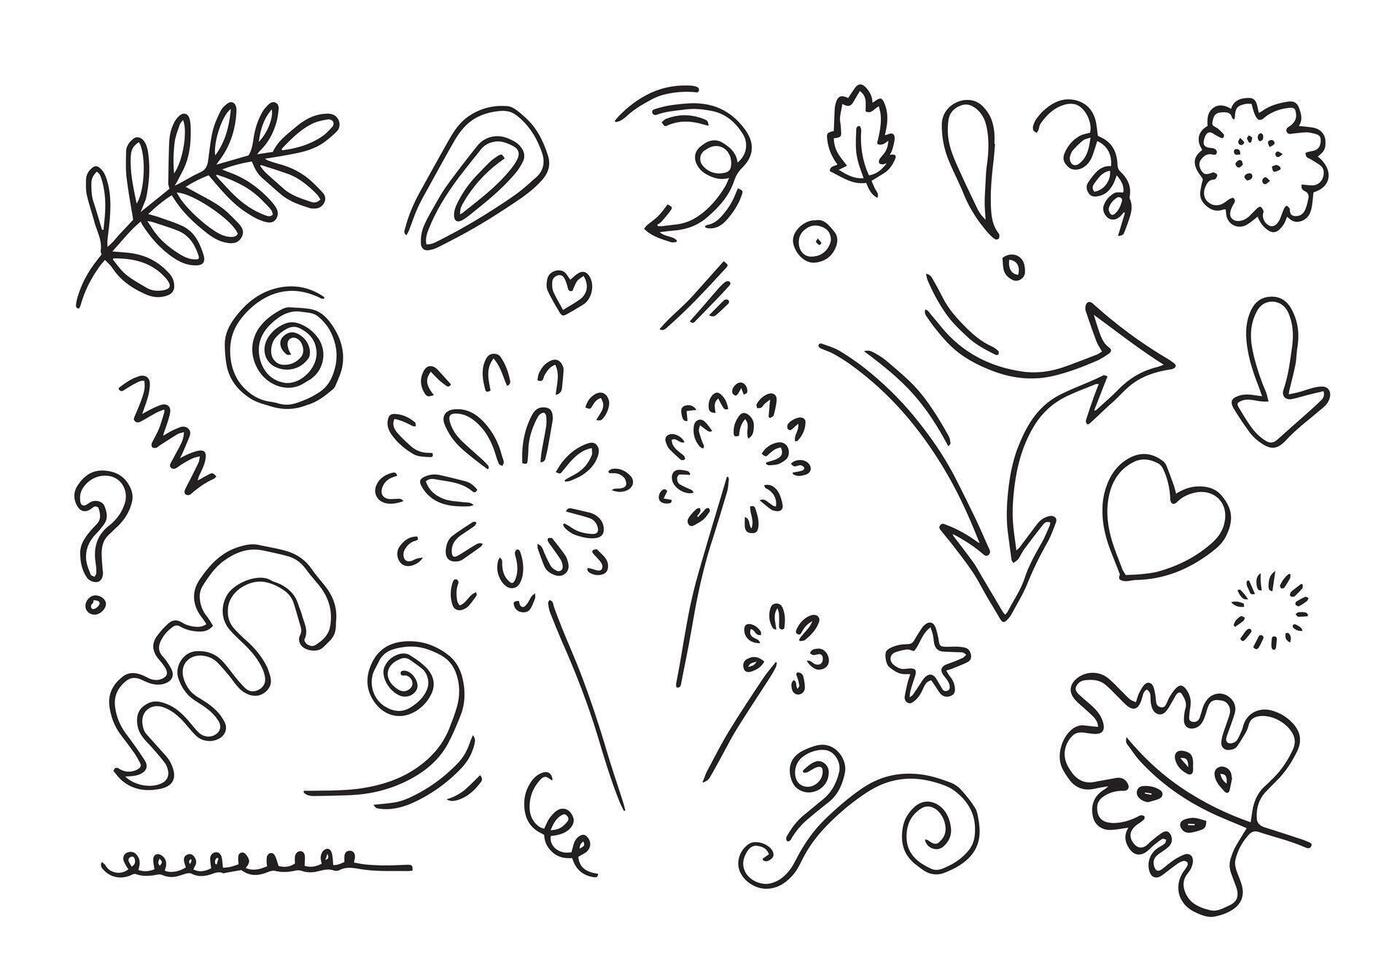 leaves, hearts, abstract, ribbons, arrows and other elements in hand drawn styles for concept designs. Doodle illustration. template for decoration vector